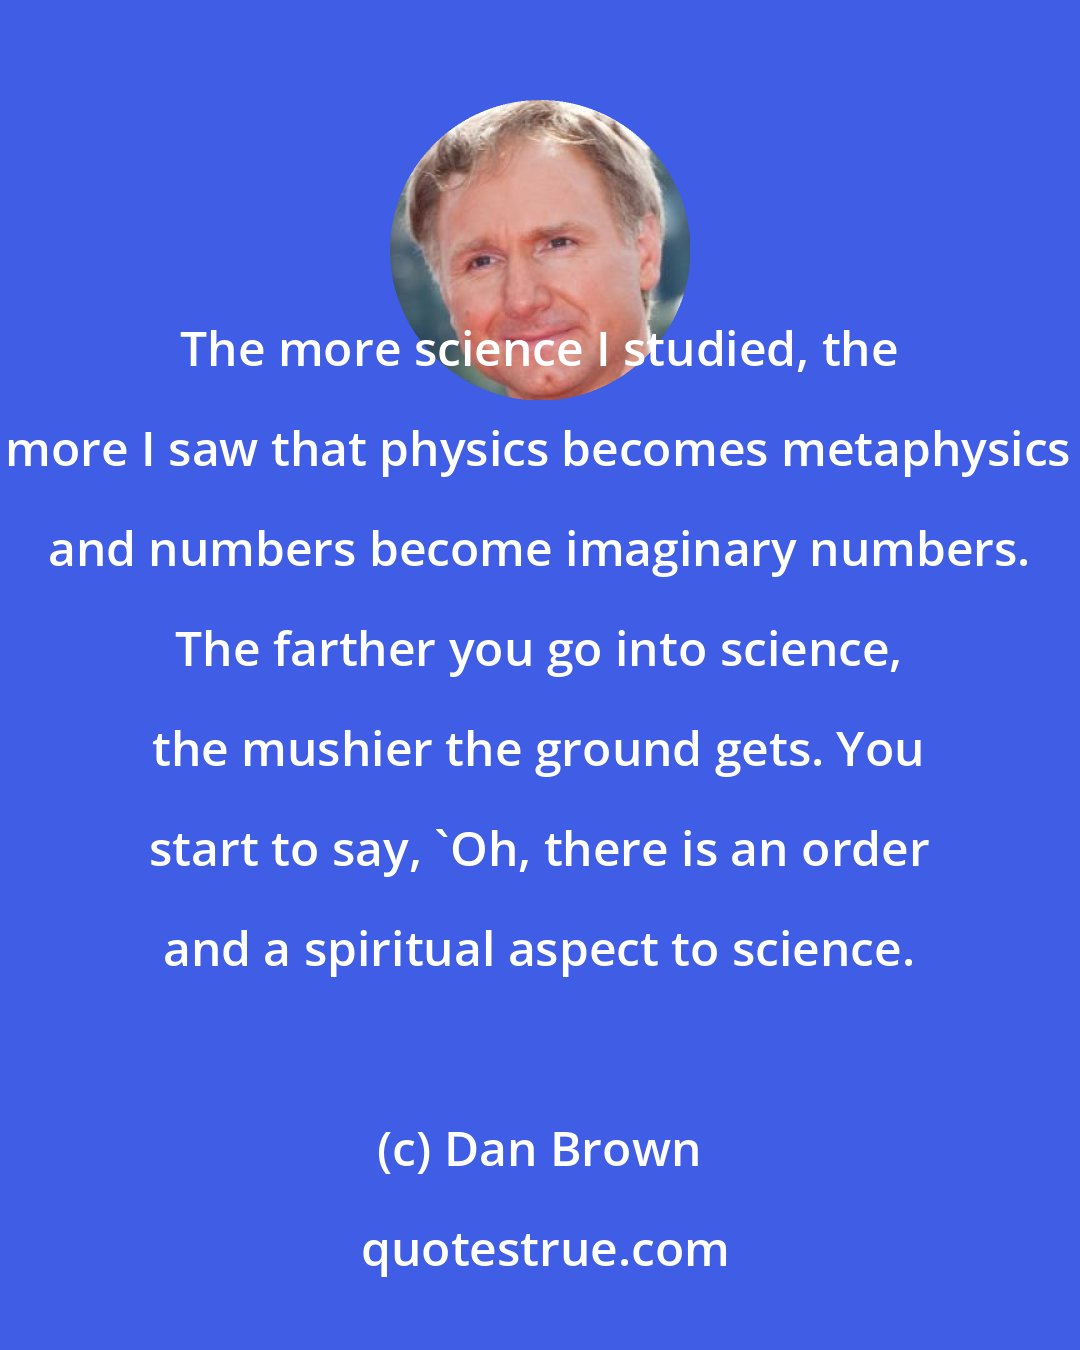 Dan Brown: The more science I studied, the more I saw that physics becomes metaphysics and numbers become imaginary numbers. The farther you go into science, the mushier the ground gets. You start to say, 'Oh, there is an order and a spiritual aspect to science.